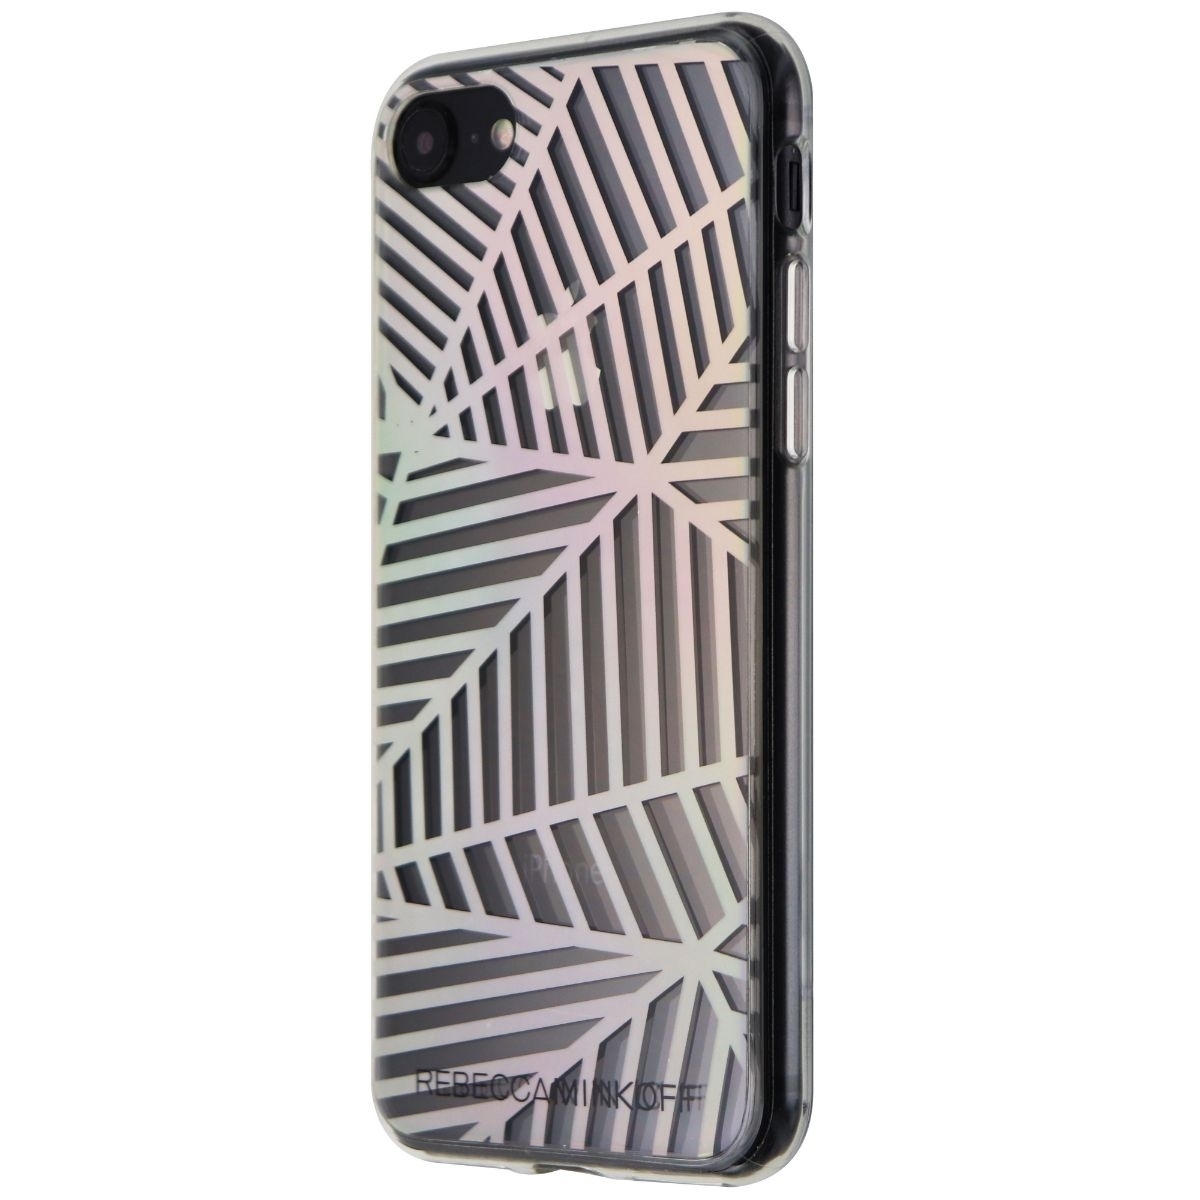 Rebecca Minkoff Sheer Protection Case For IPhone 8 / 7 - Geometic Pattern/Clear